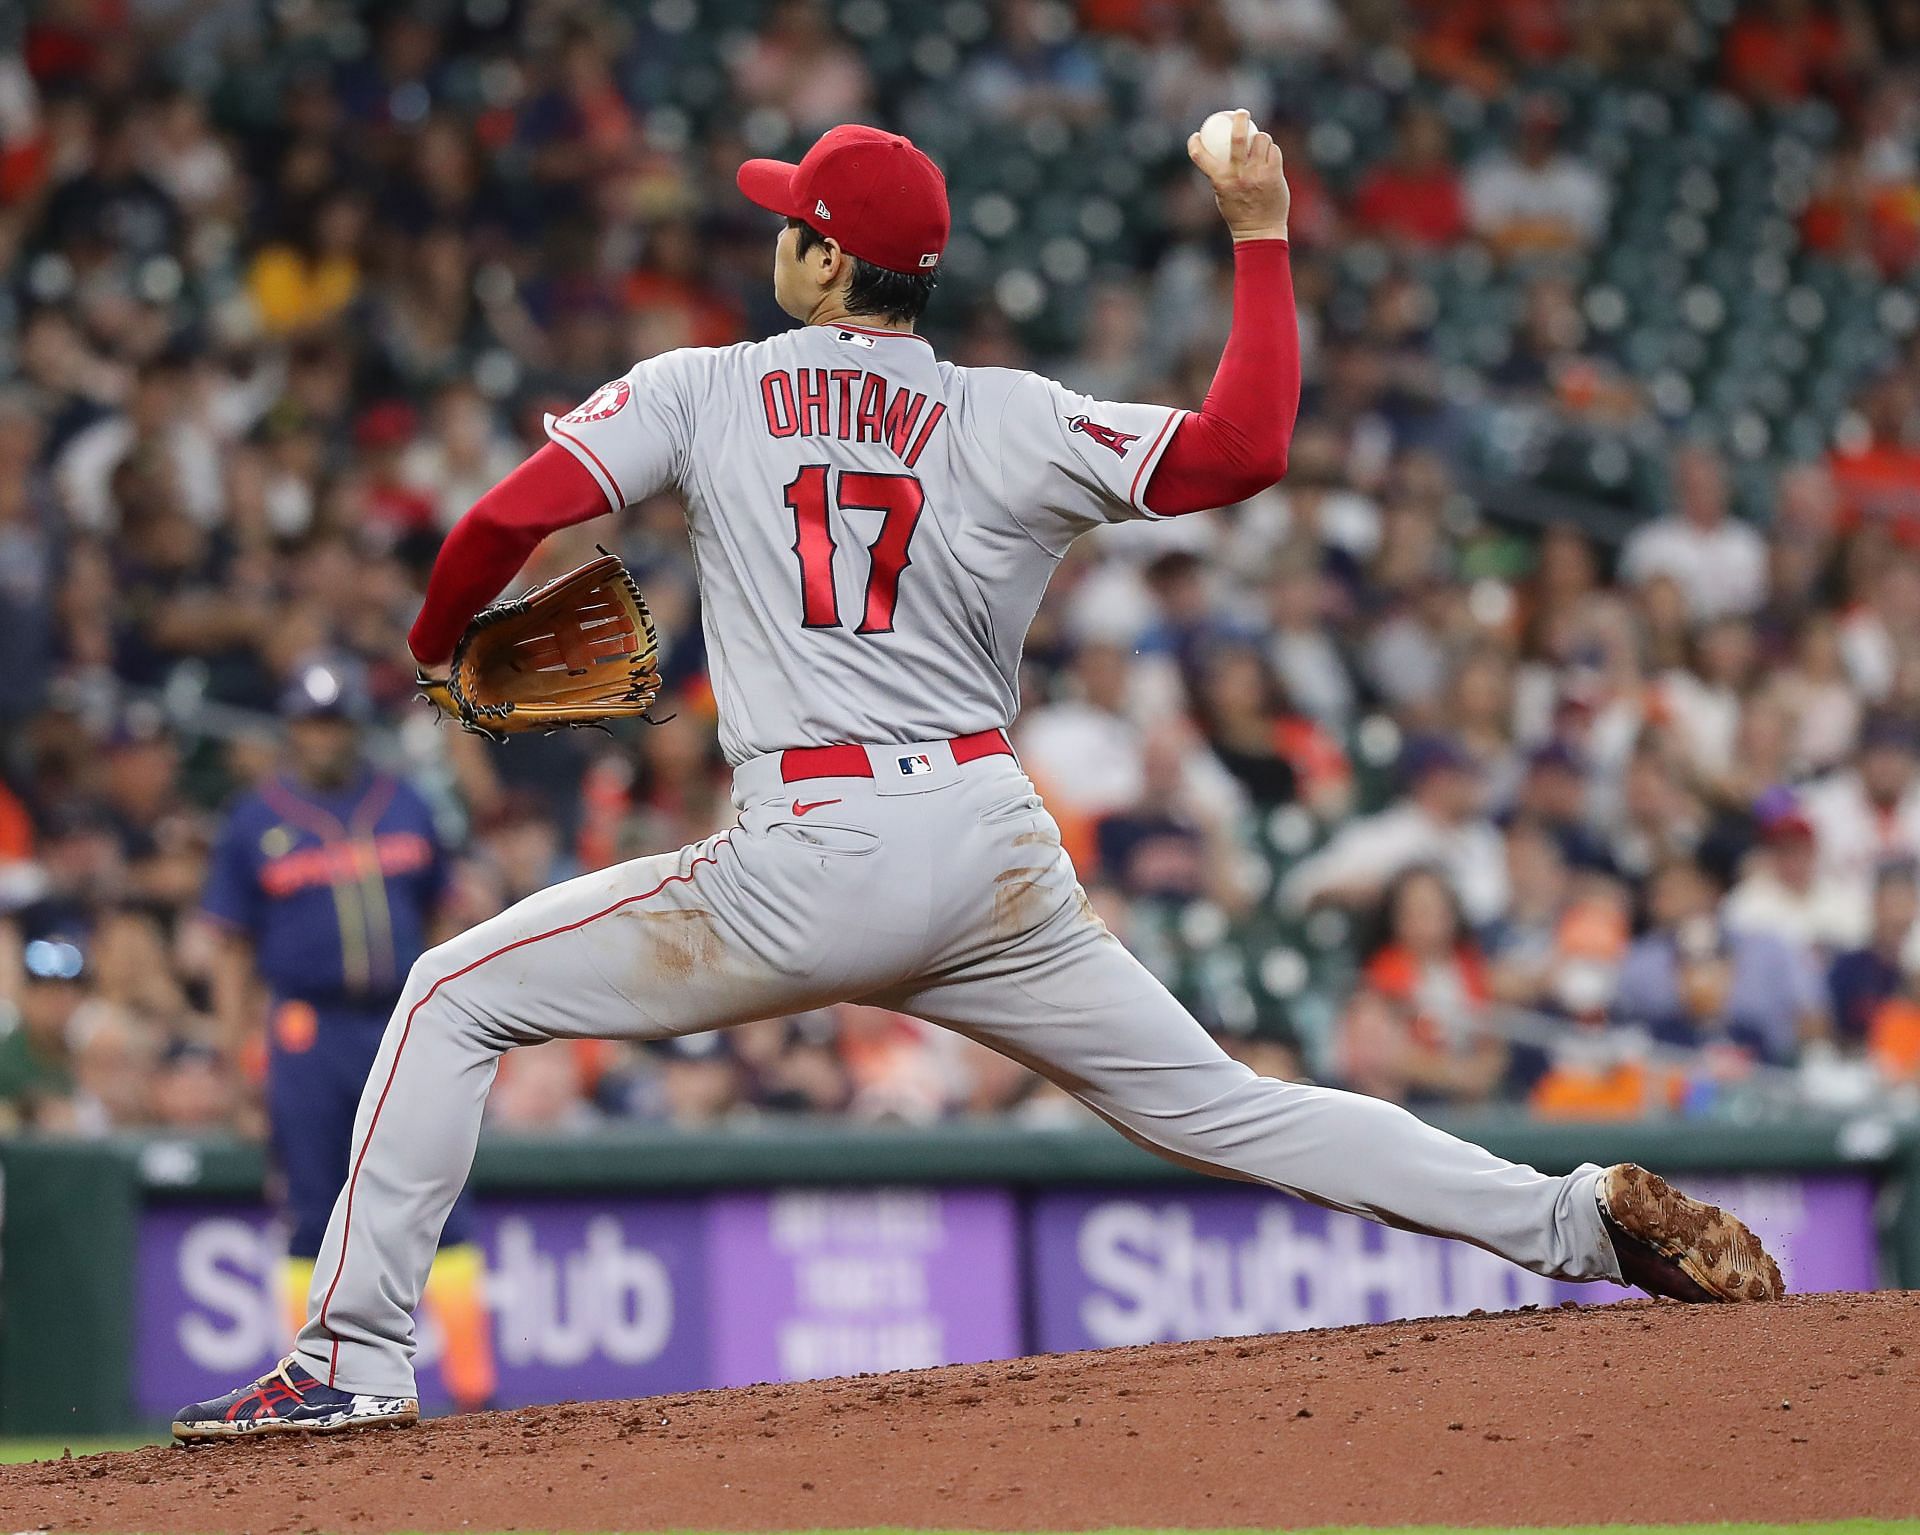 Shohei Ohtani pitches against the Houston Astros at Minute Maid Park.